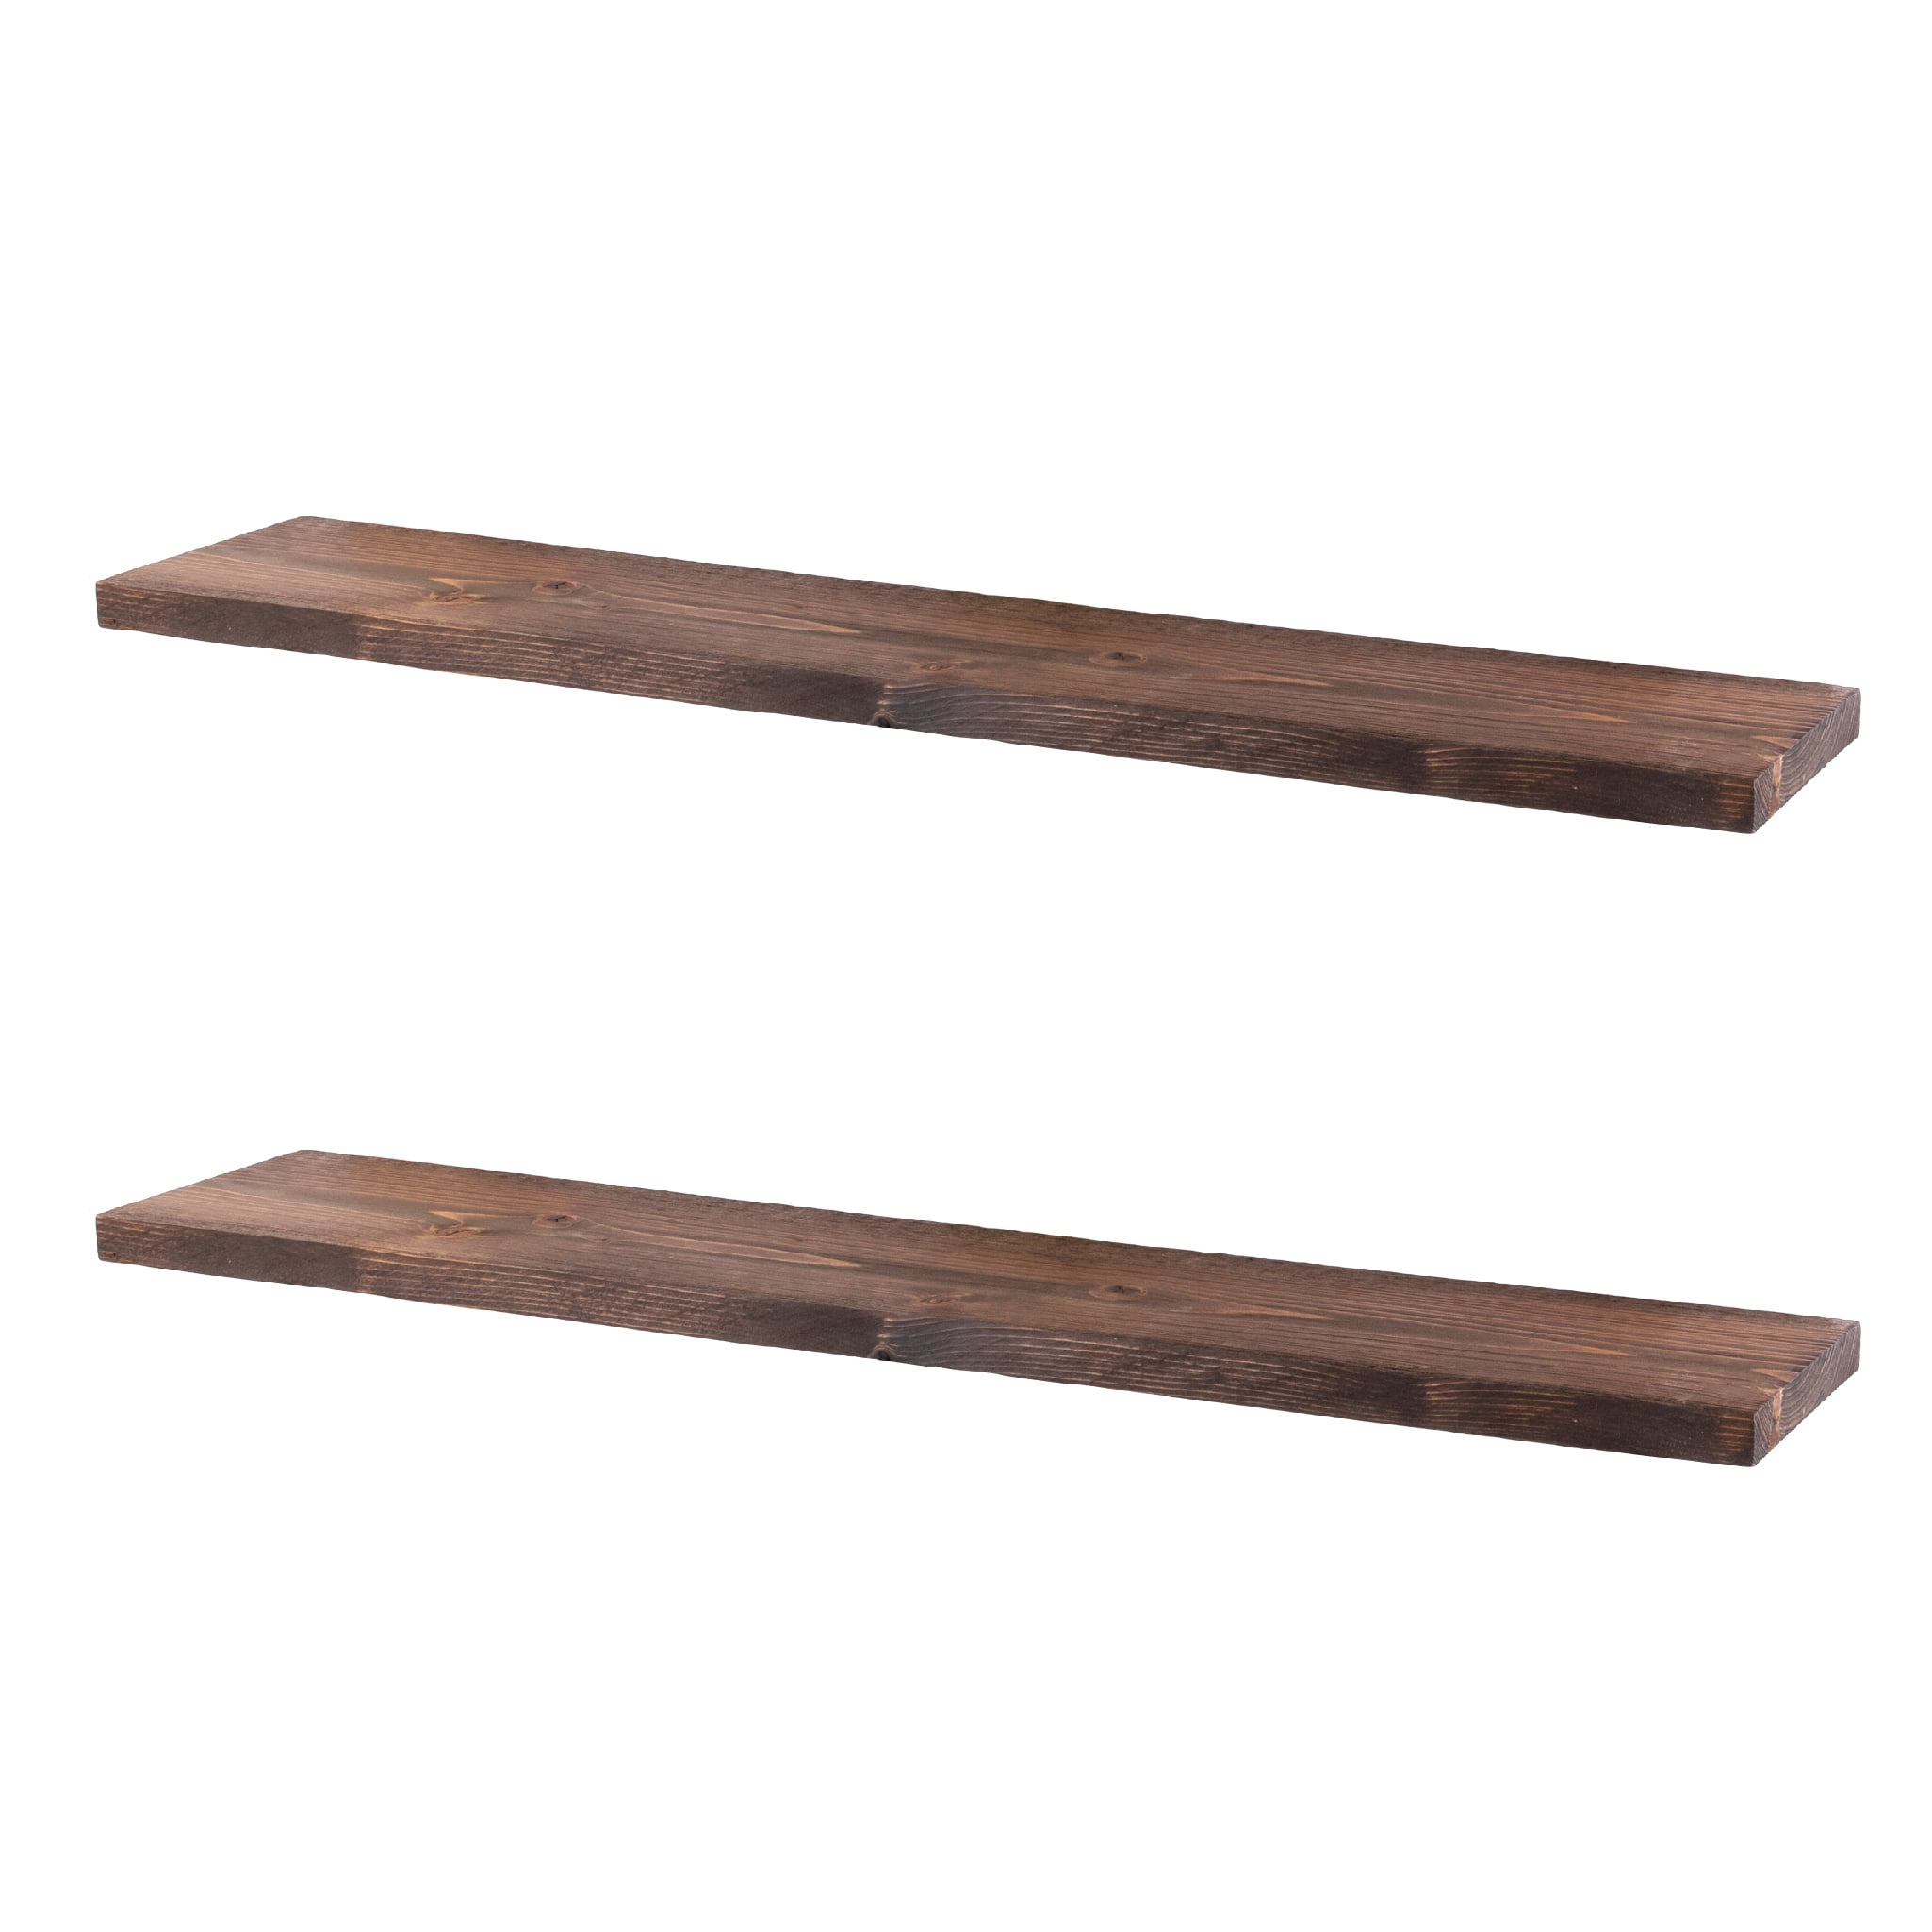 PIPE DECOR Solid Wood Wall Shelves, 36